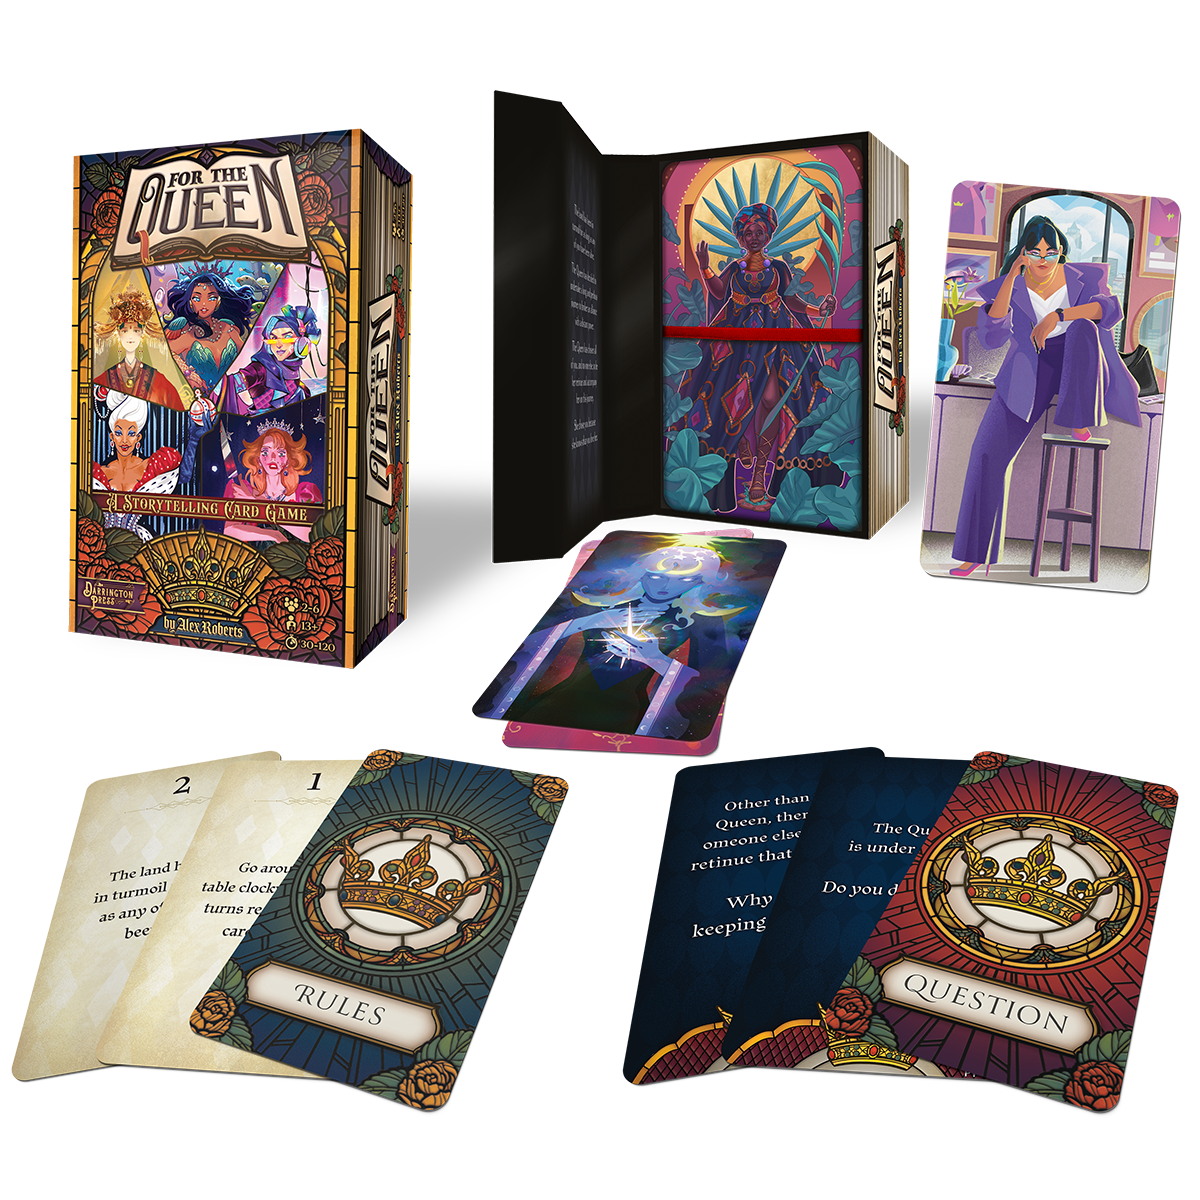 A colorful close box that says "For the Queen," which has five femme presenting characters arranged on the cover. There is also an image of the box open, with the cards inside. There are examples of what the Rules and Questions cards look like, and there are two queen cards, one showing a woman wearing a purple business suit, and another showing a celestial queen with a glowing crown.